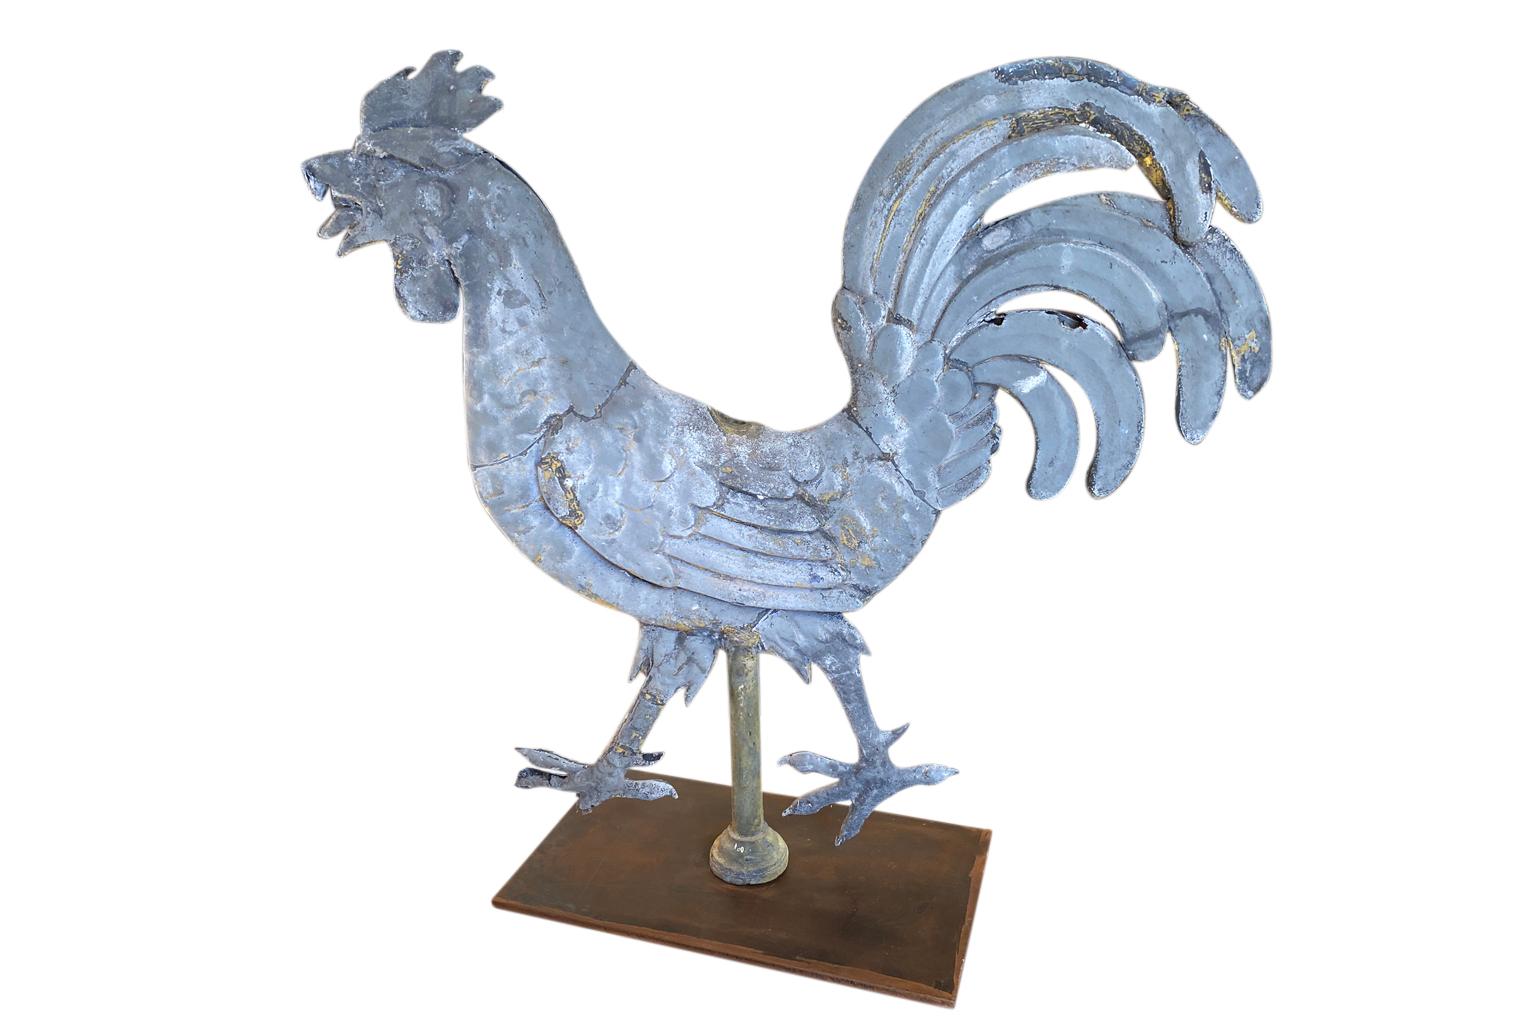 A very handsome mid-19th century Coq - Rooster from the South of France. Beautifully crafted in zinc with fabulous patina. Now resting on its iron base. A terrific accent piece.